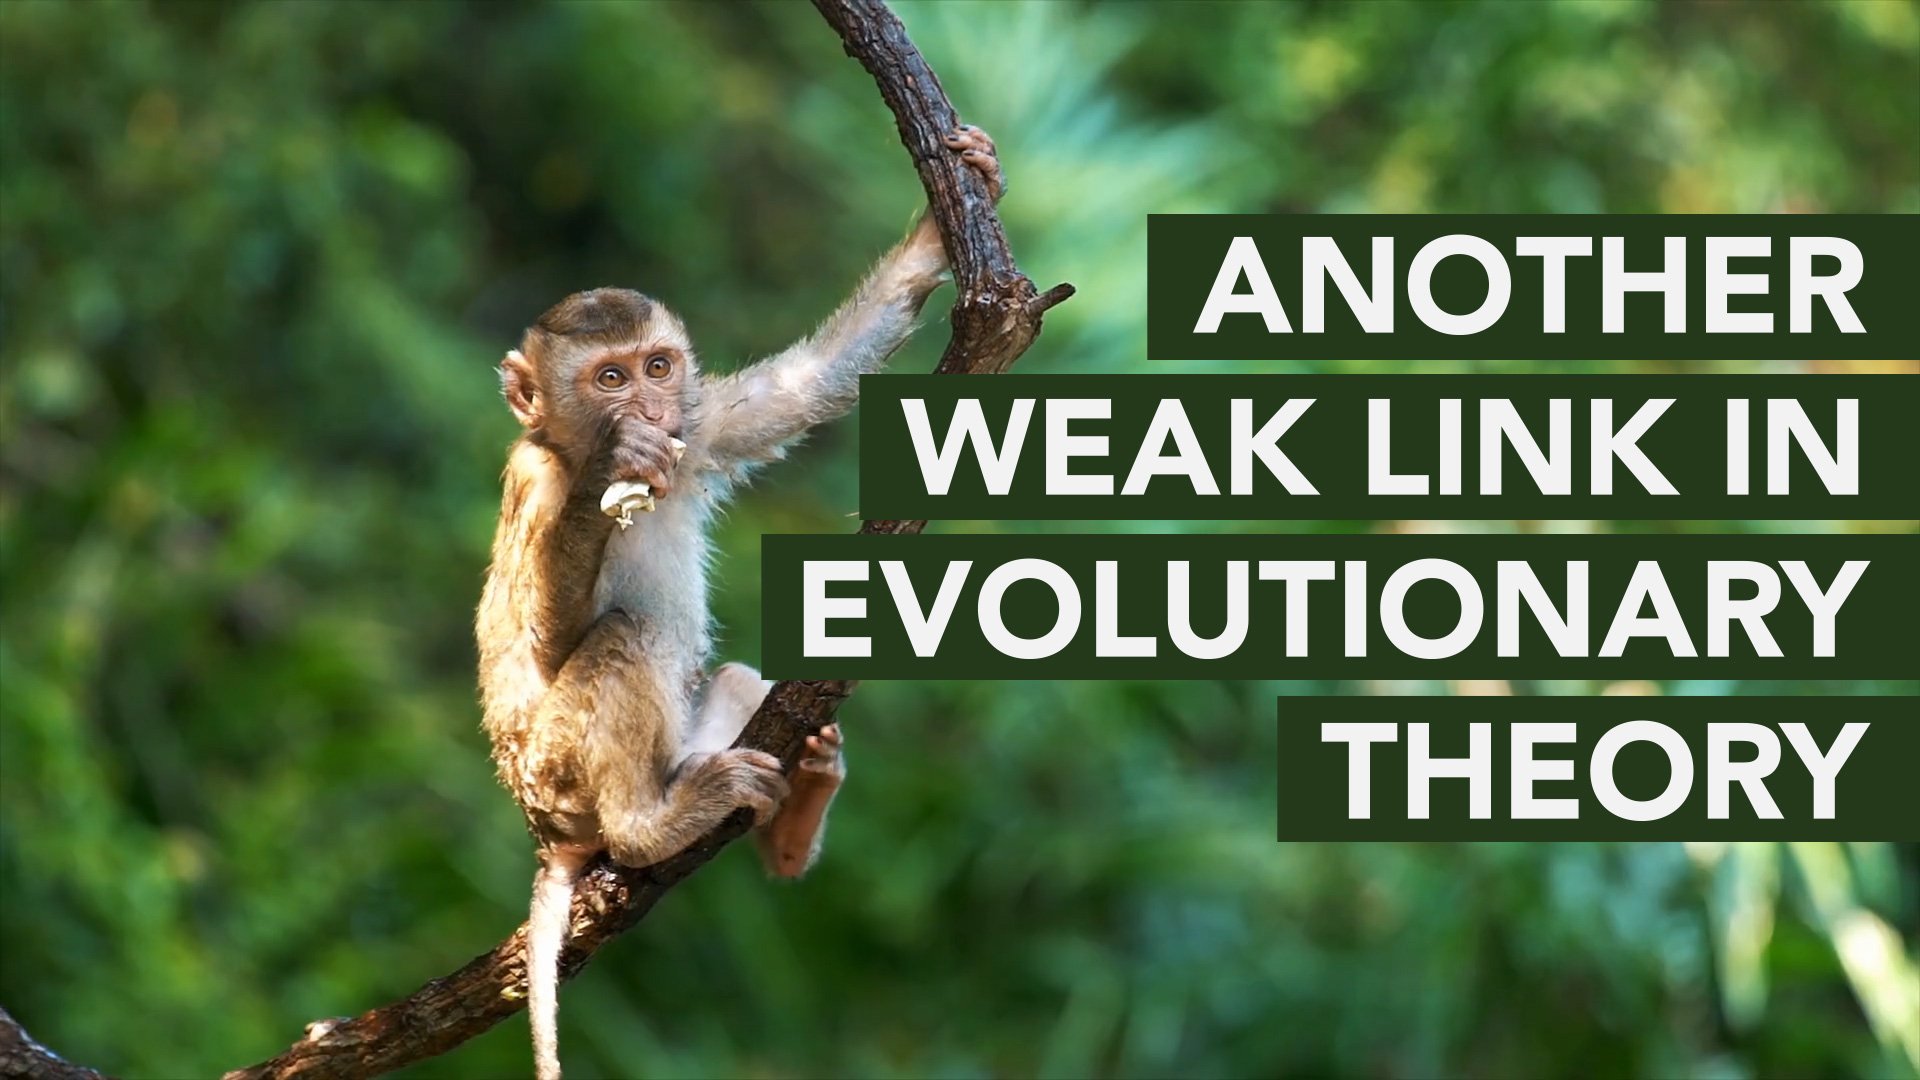 Another Weak Link in Evolutionary Theory